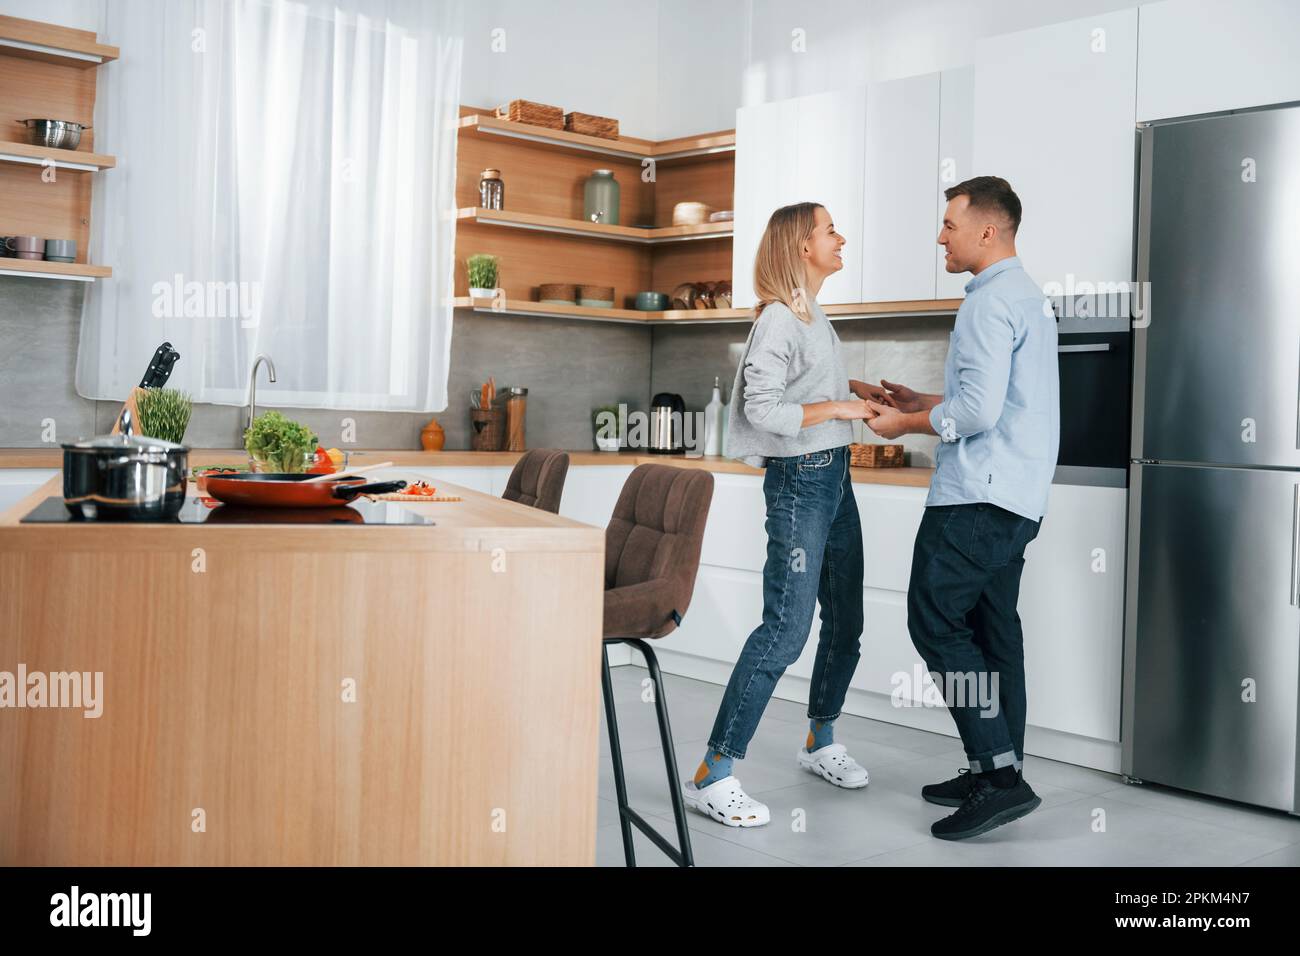 Dancing together. Couple preparing food at home on the modern kitchen. Stock Photo